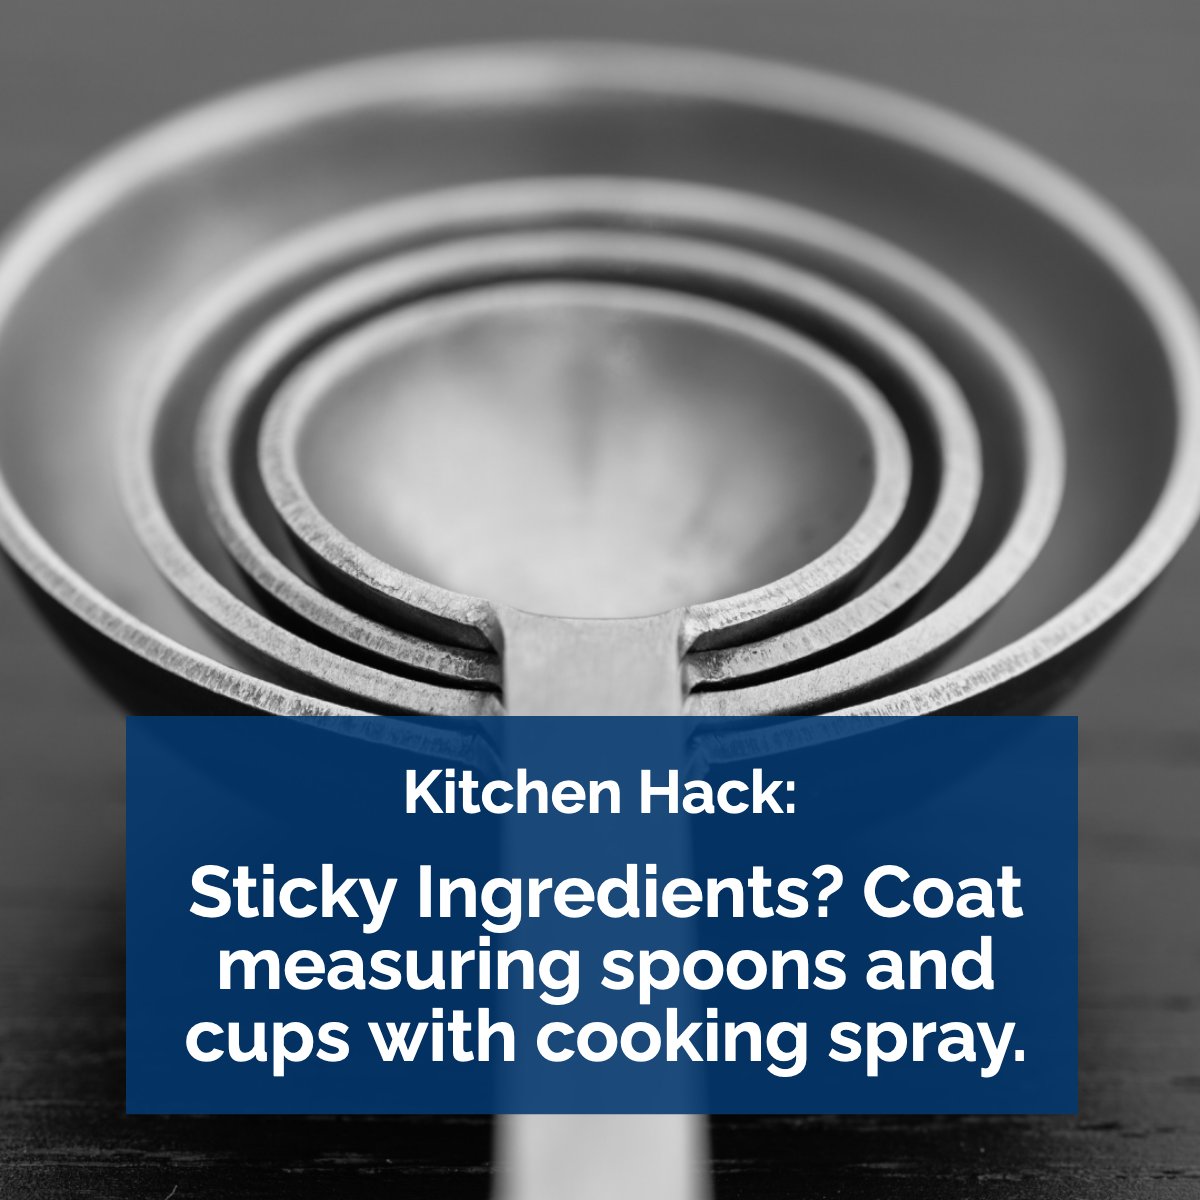 Kitchen Hack:

Share yours too... 🍽️🍳

#didyouknow  #hack  #kitchenhack  #kitchen  #goodtoknow  #randomfact 
#justclosed #weloveourclients #homebuyers #homeowner #homeclosing #coloradospringsrealestate #coloradospringsrealtor #coloradosprings #colorado